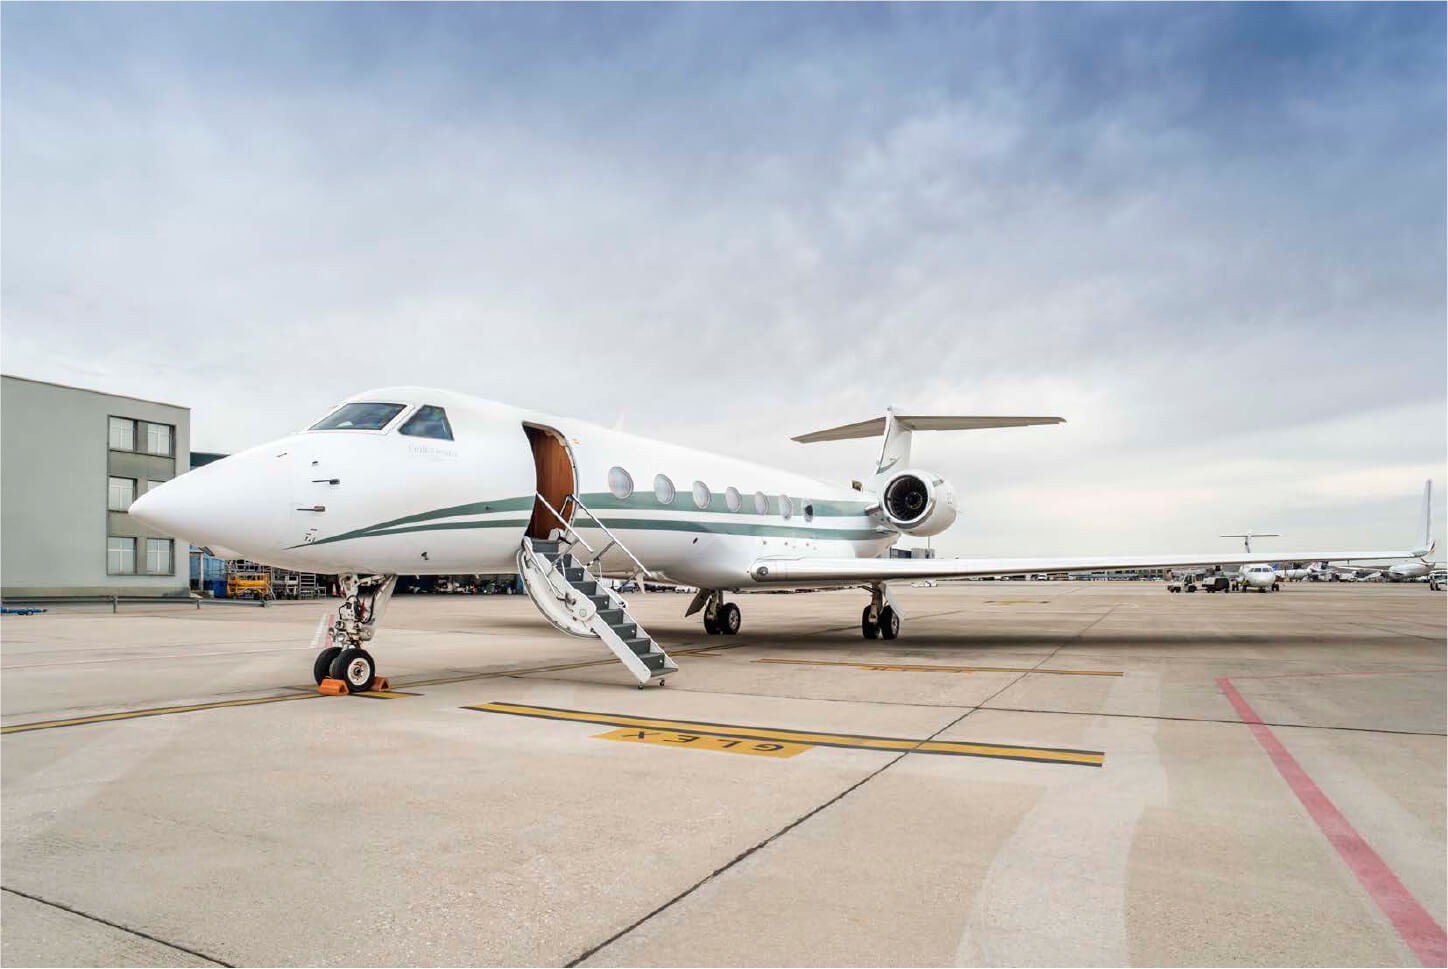 A Gulfstream G550 Model White Color Jet With Airstair